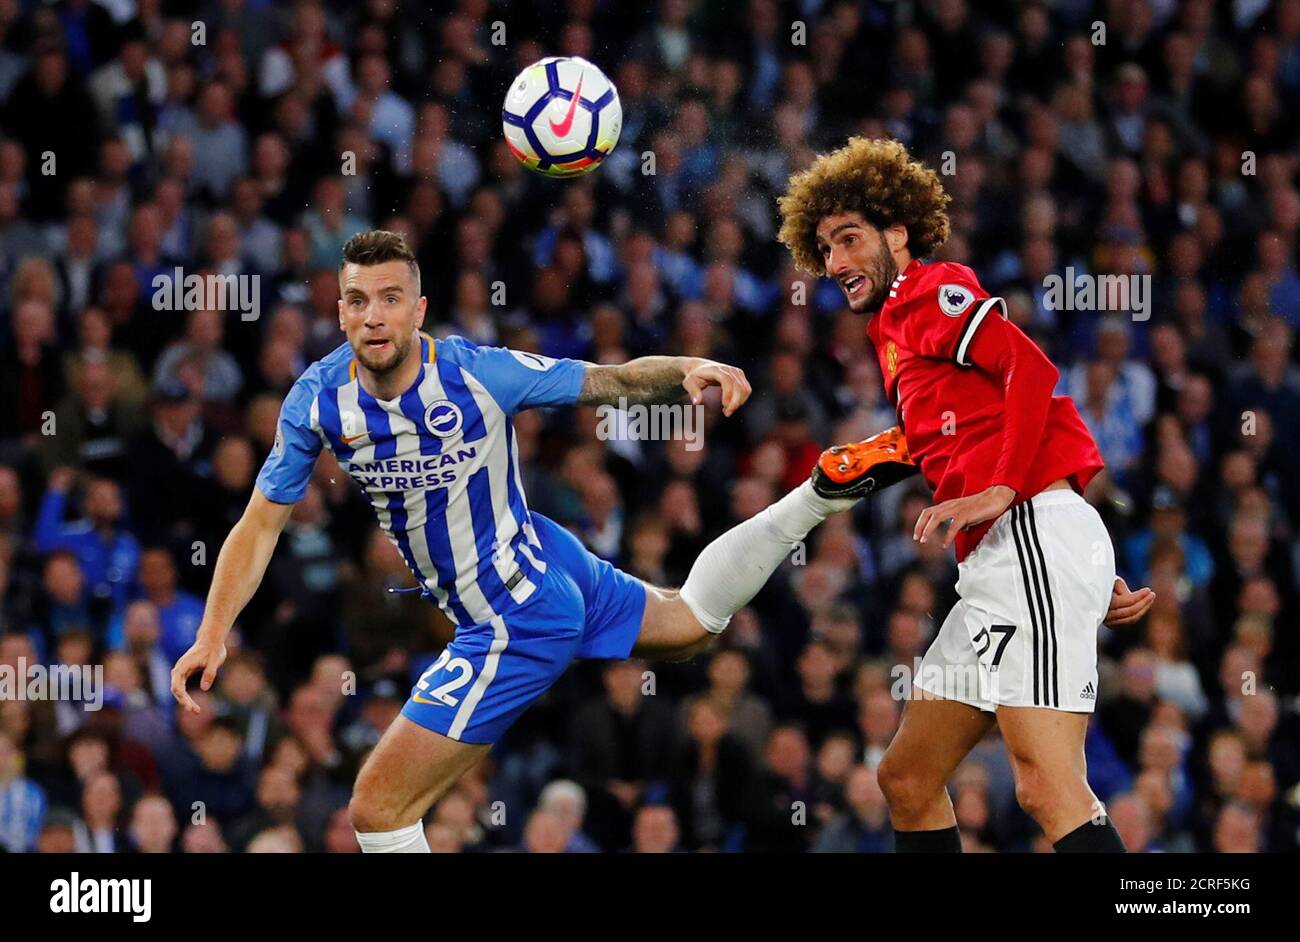 Soccer Football - Premier League - Brighton & Hove Albion v Manchester United - The American Express Community Stadium, Brighton, Britain - May 4, 2018   Manchester United's Marouane Fellaini in action with Brighton's Shane Duffy   REUTERS/Eddie Keogh    EDITORIAL USE ONLY. No use with unauthorized audio, video, data, fixture lists, club/league logos or "live" services. Online in-match use limited to 75 images, no video emulation. No use in betting, games or single club/league/player publications.  Please contact your account representative for further details. Stock Photo